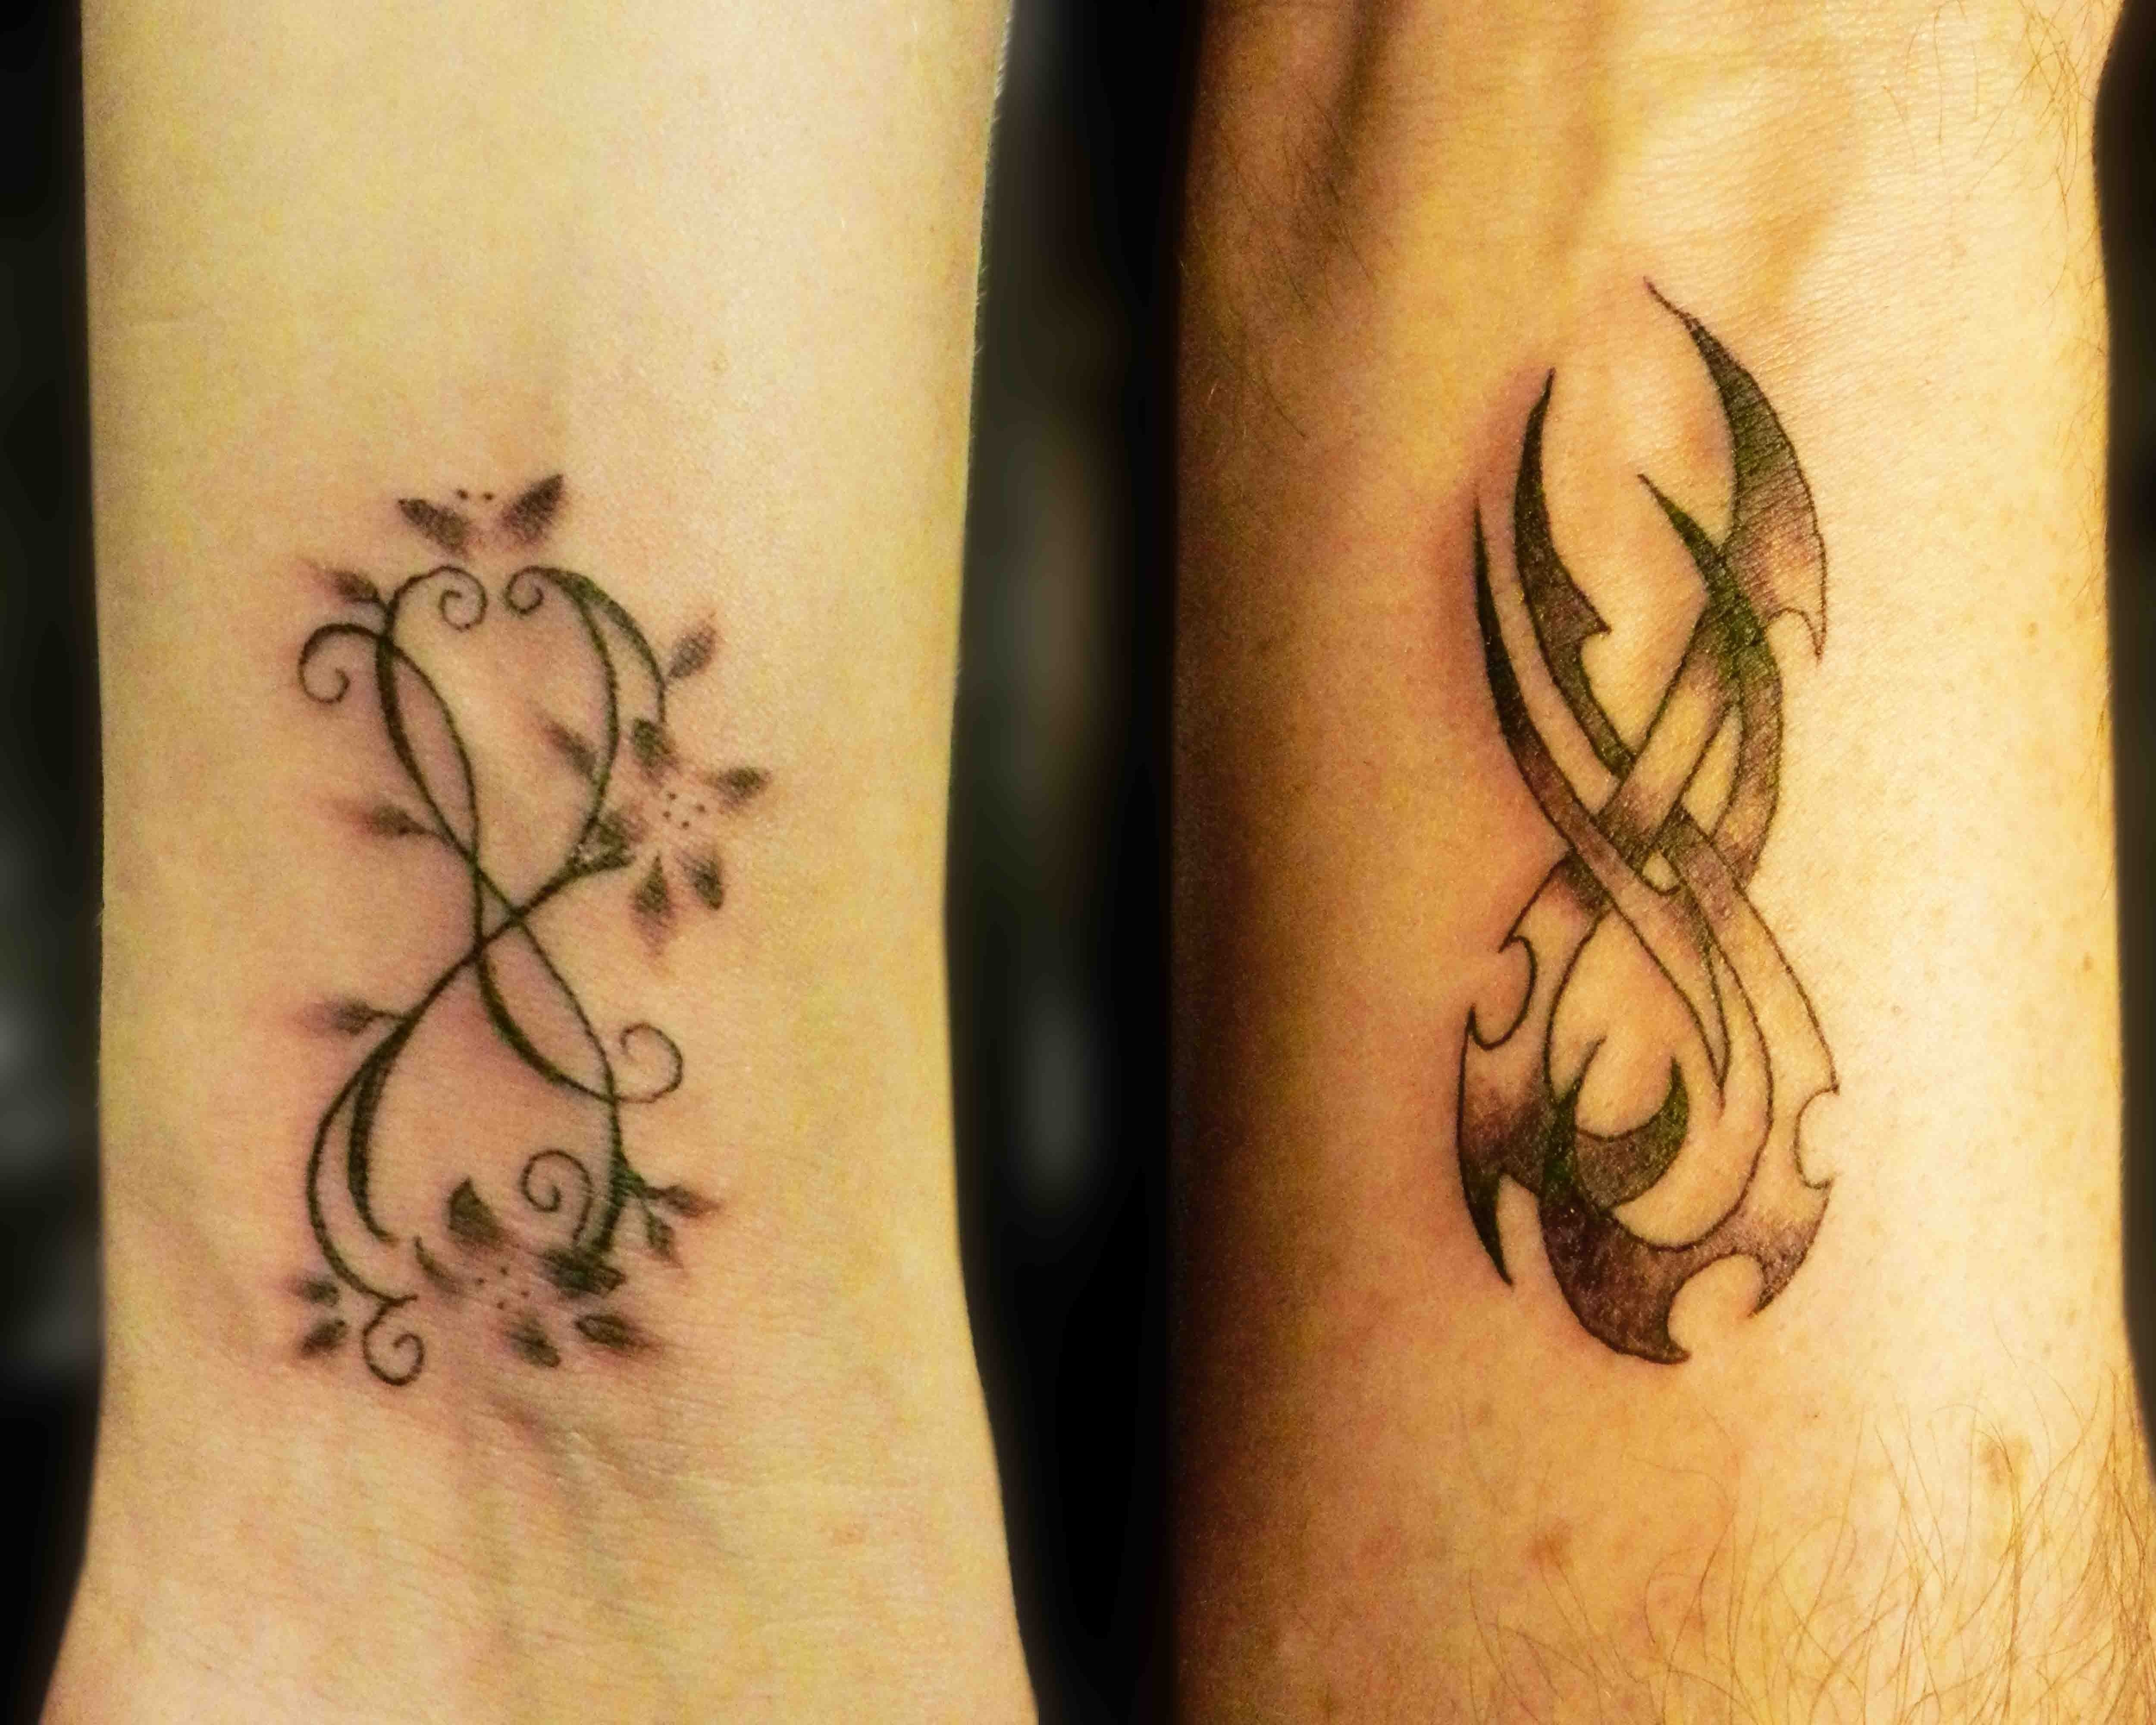 10 Spectacular His And Her Tattoo Ideas matching infinity tattoos secret ink tattoo 2022